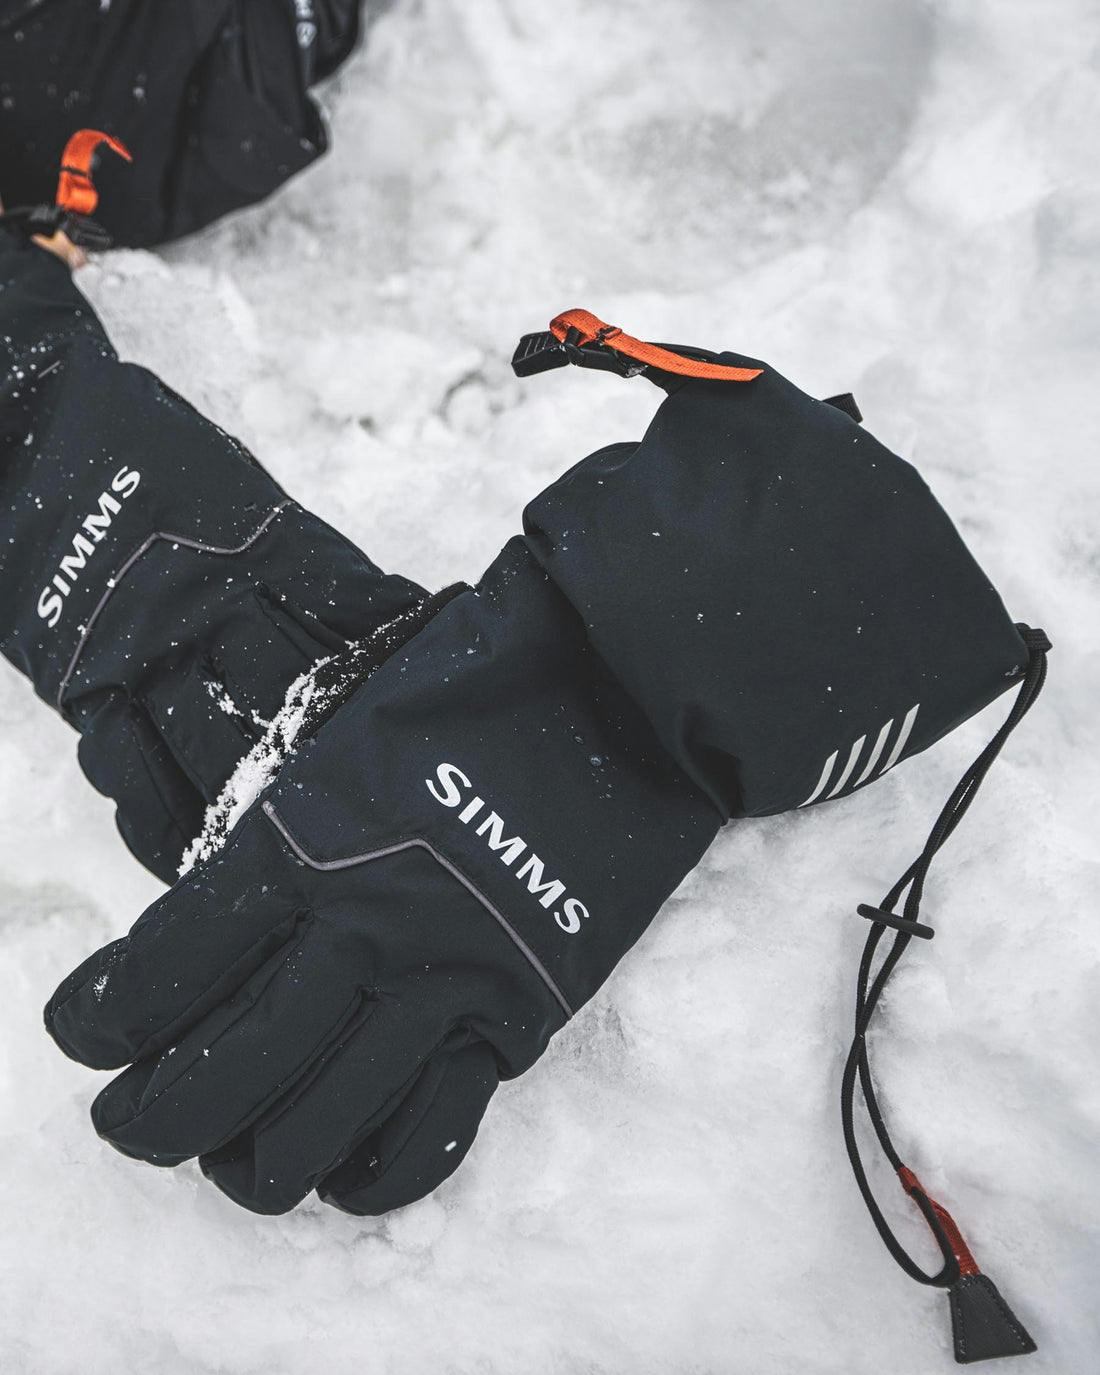 Simms Challenger Insulated Gloves